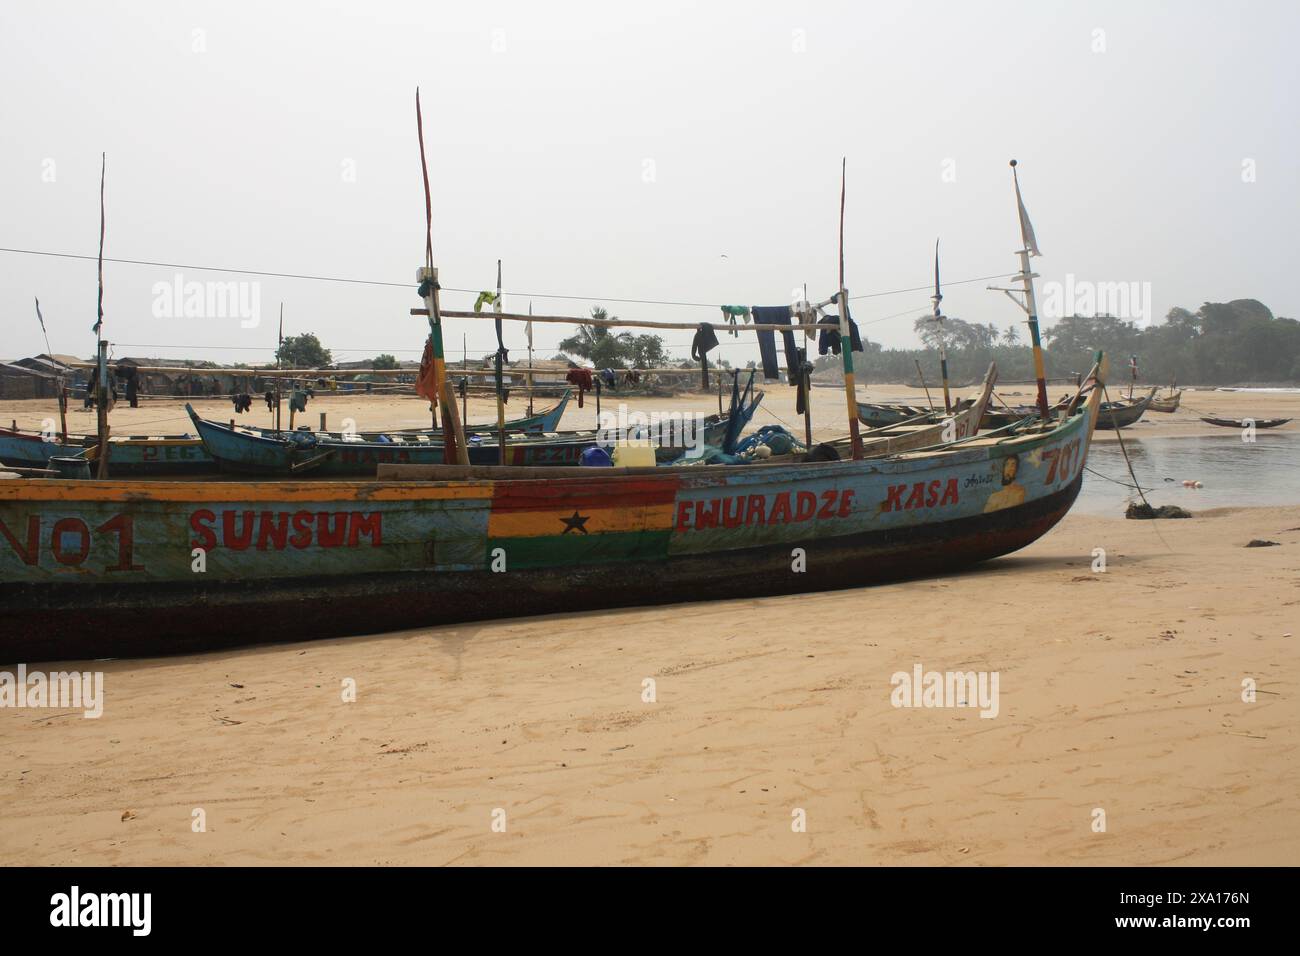 A large, brightly painted fishing boat rests on the sandy beach of a Ghanaian coastal village. The vibrant colors and detailed artwork on the boat ref Stock Photo